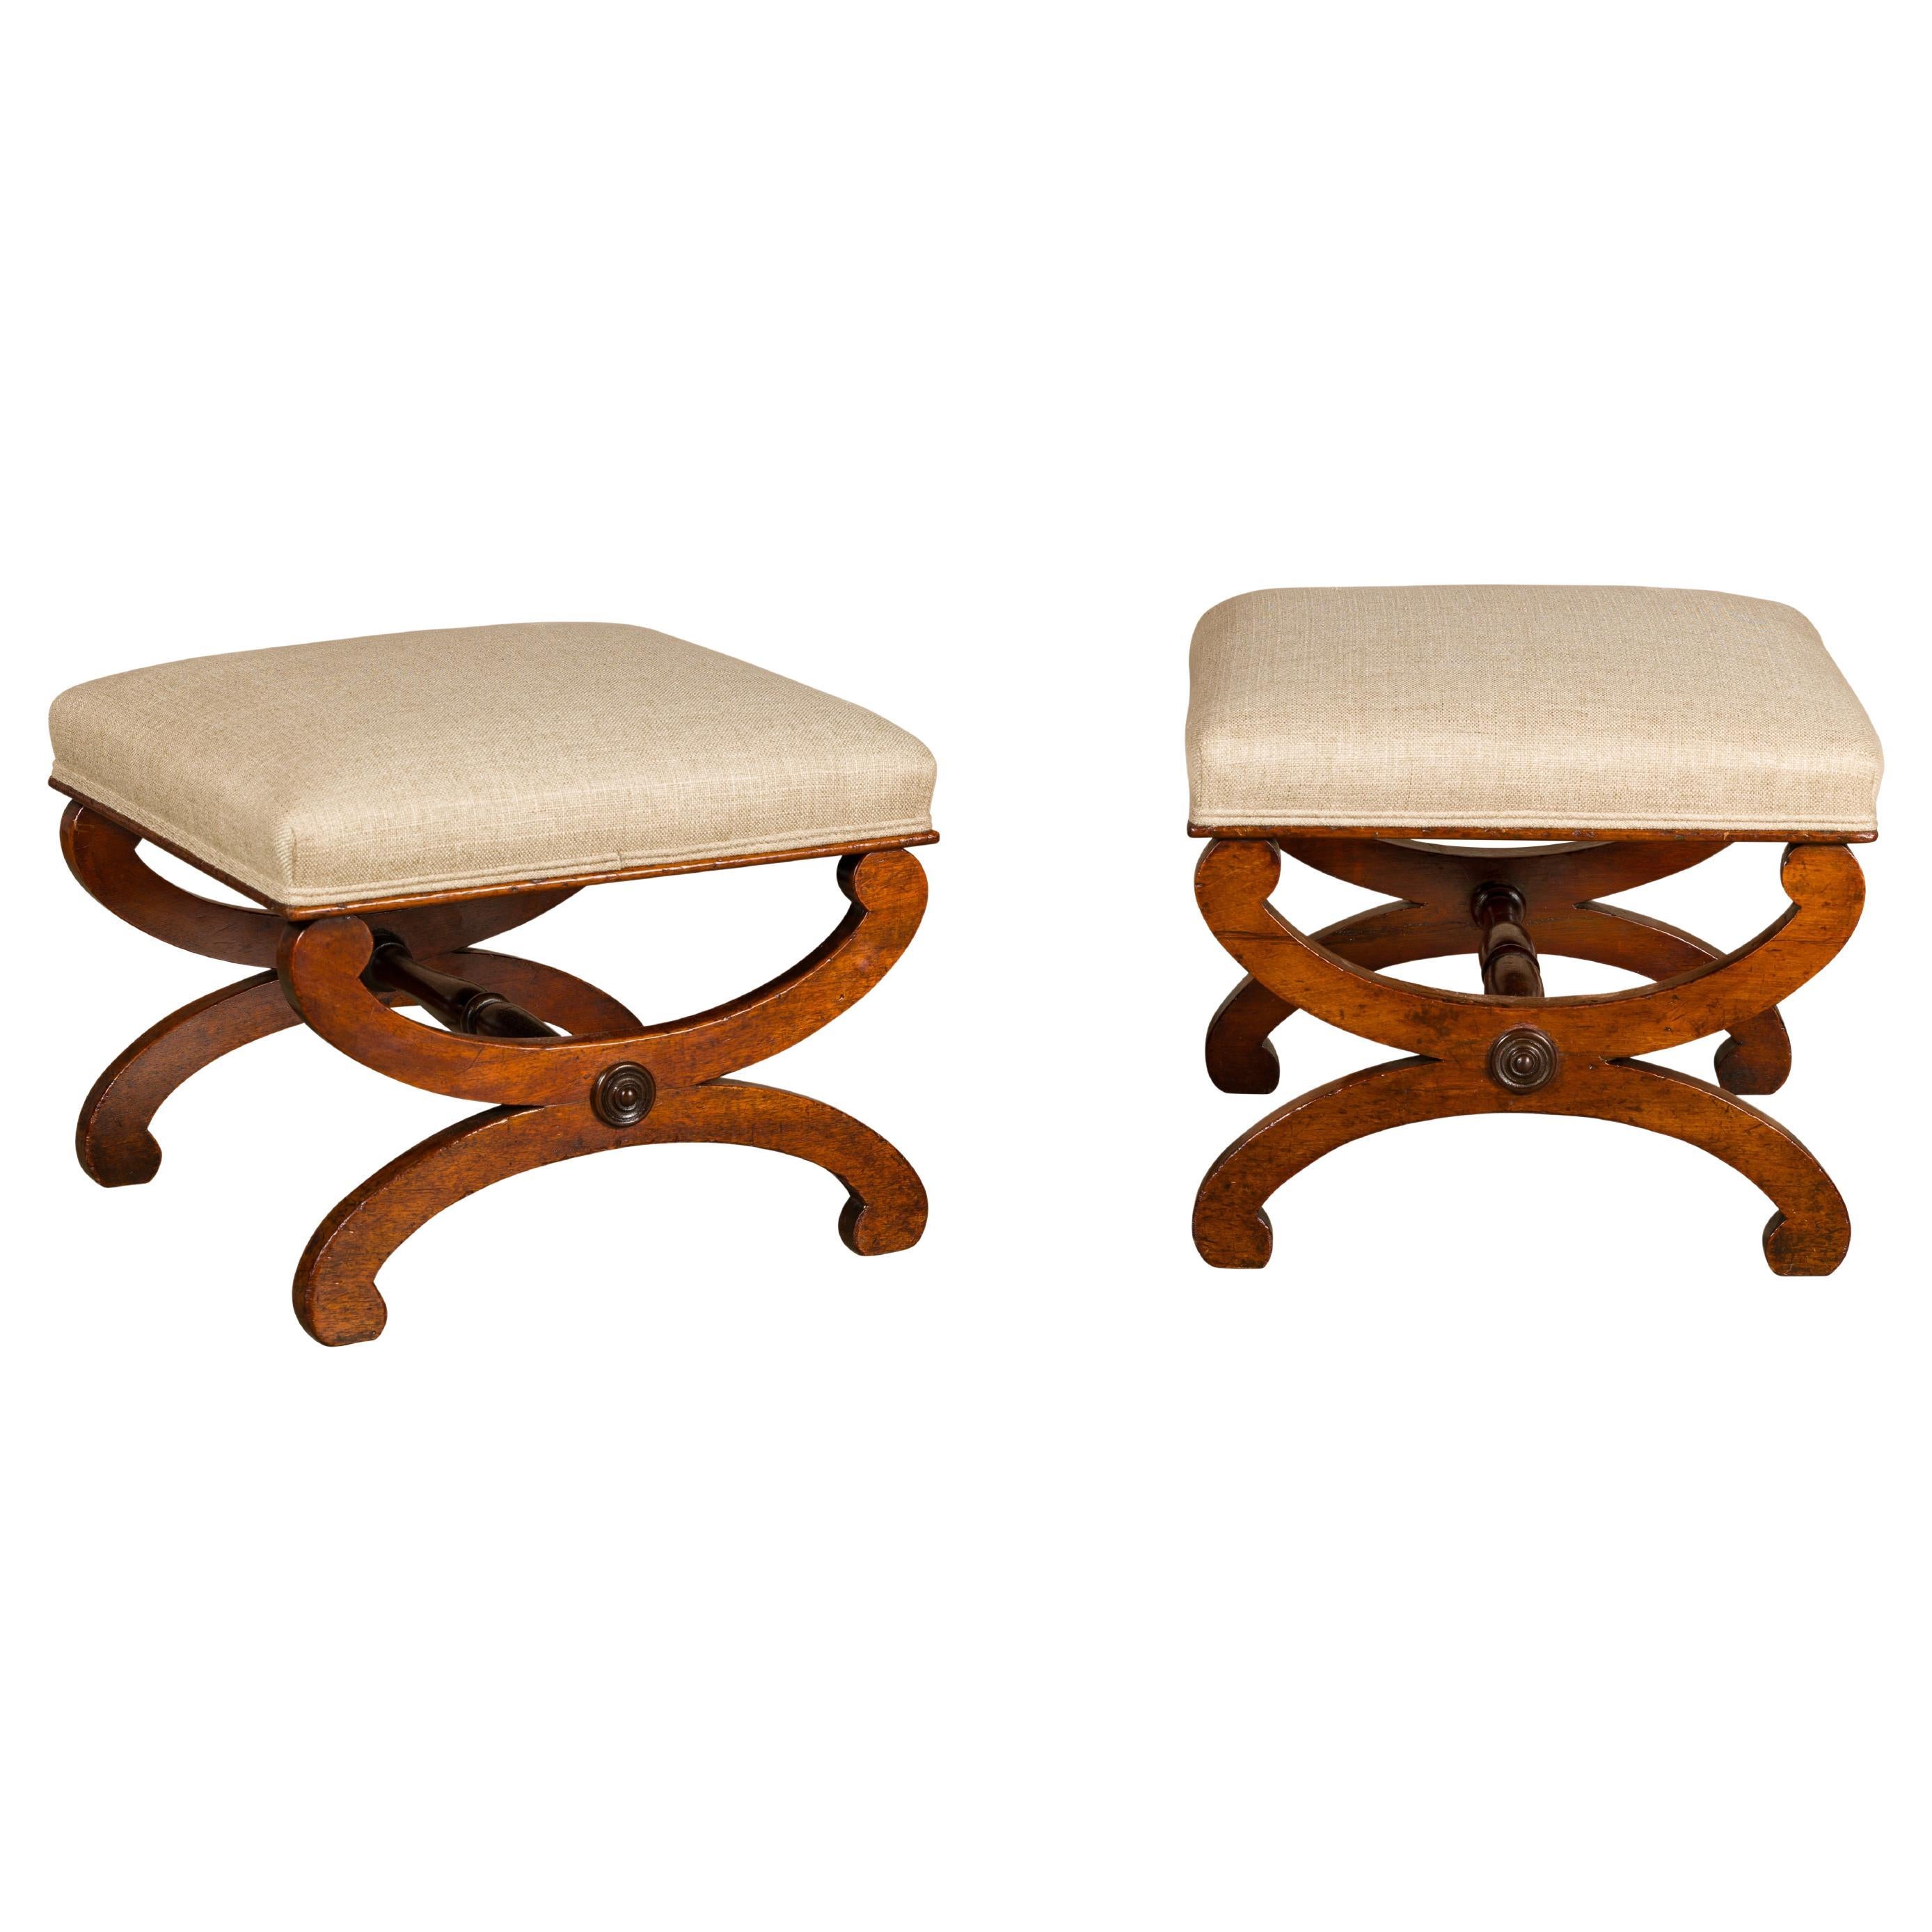 Biedermeier Period 19th Century Walnut Stools with X-Form Bases, a Pair For Sale